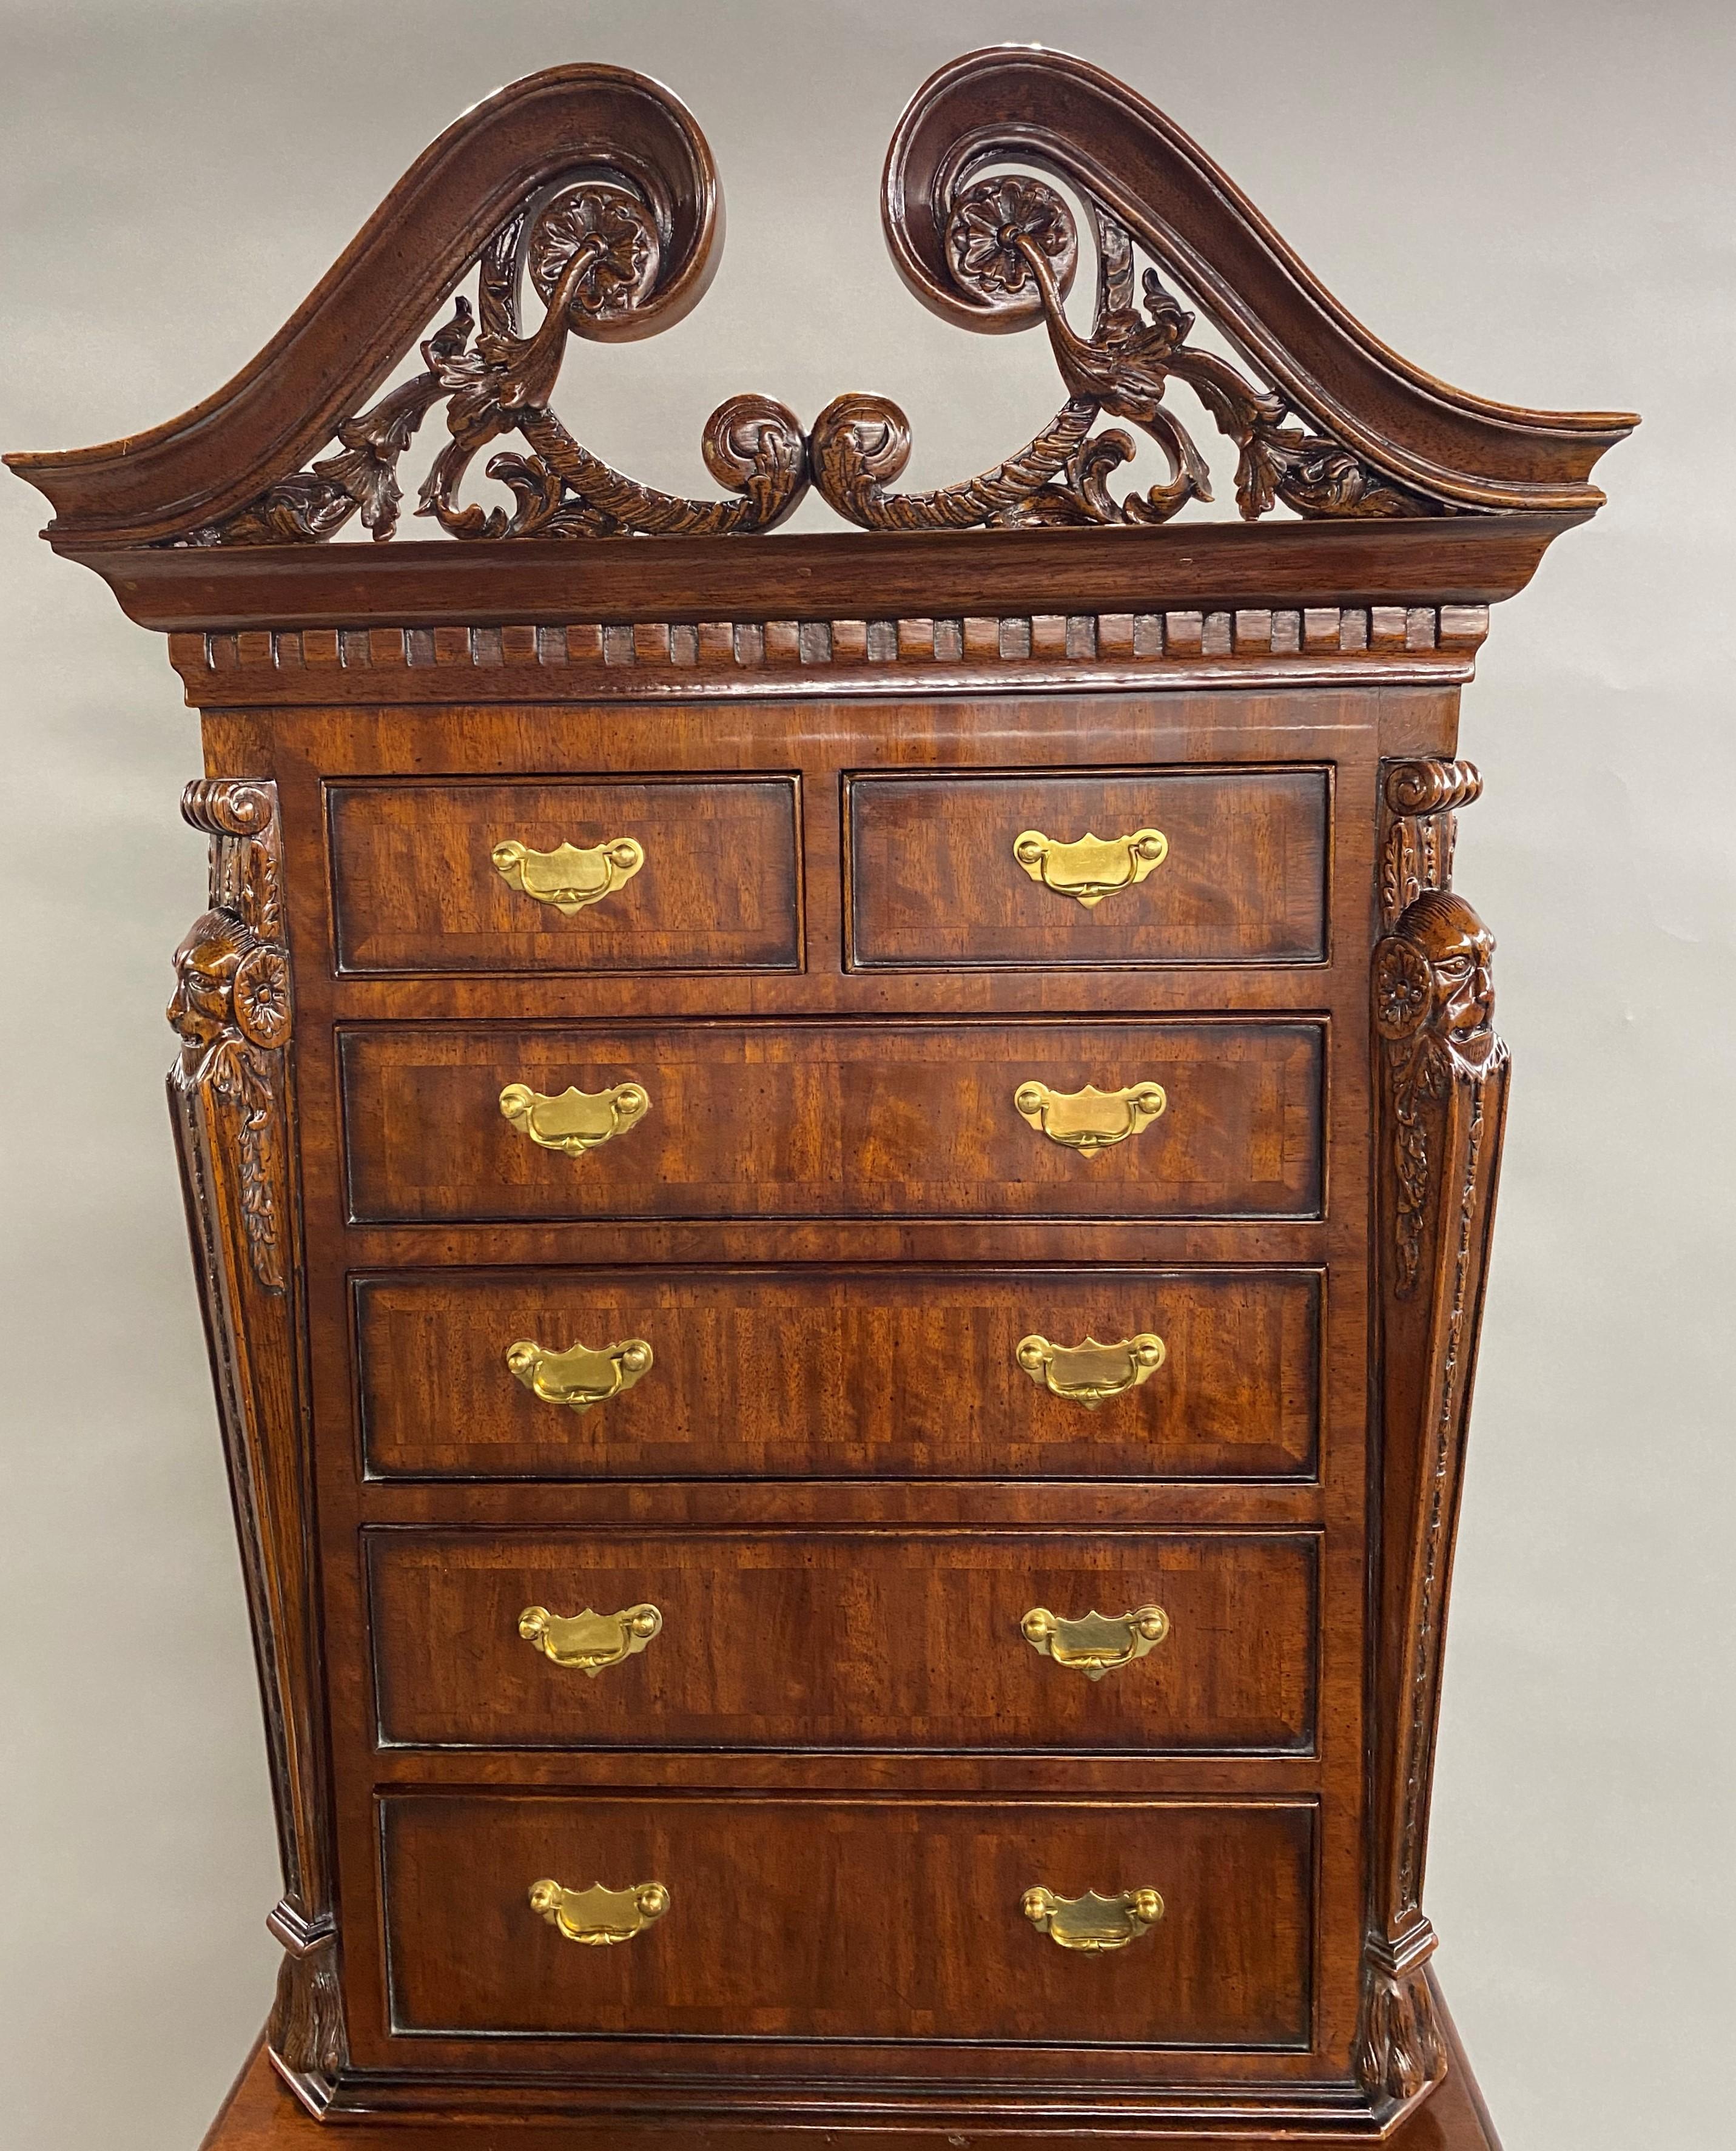 A wonderfully carved mahogany two part diminutive chest on chest or jewelry / valuables chest by Maitland Smith with a swan’s neck split pediment with scrollwork and rosettes surmounting an upper case with a two over four drawer configuration, on a